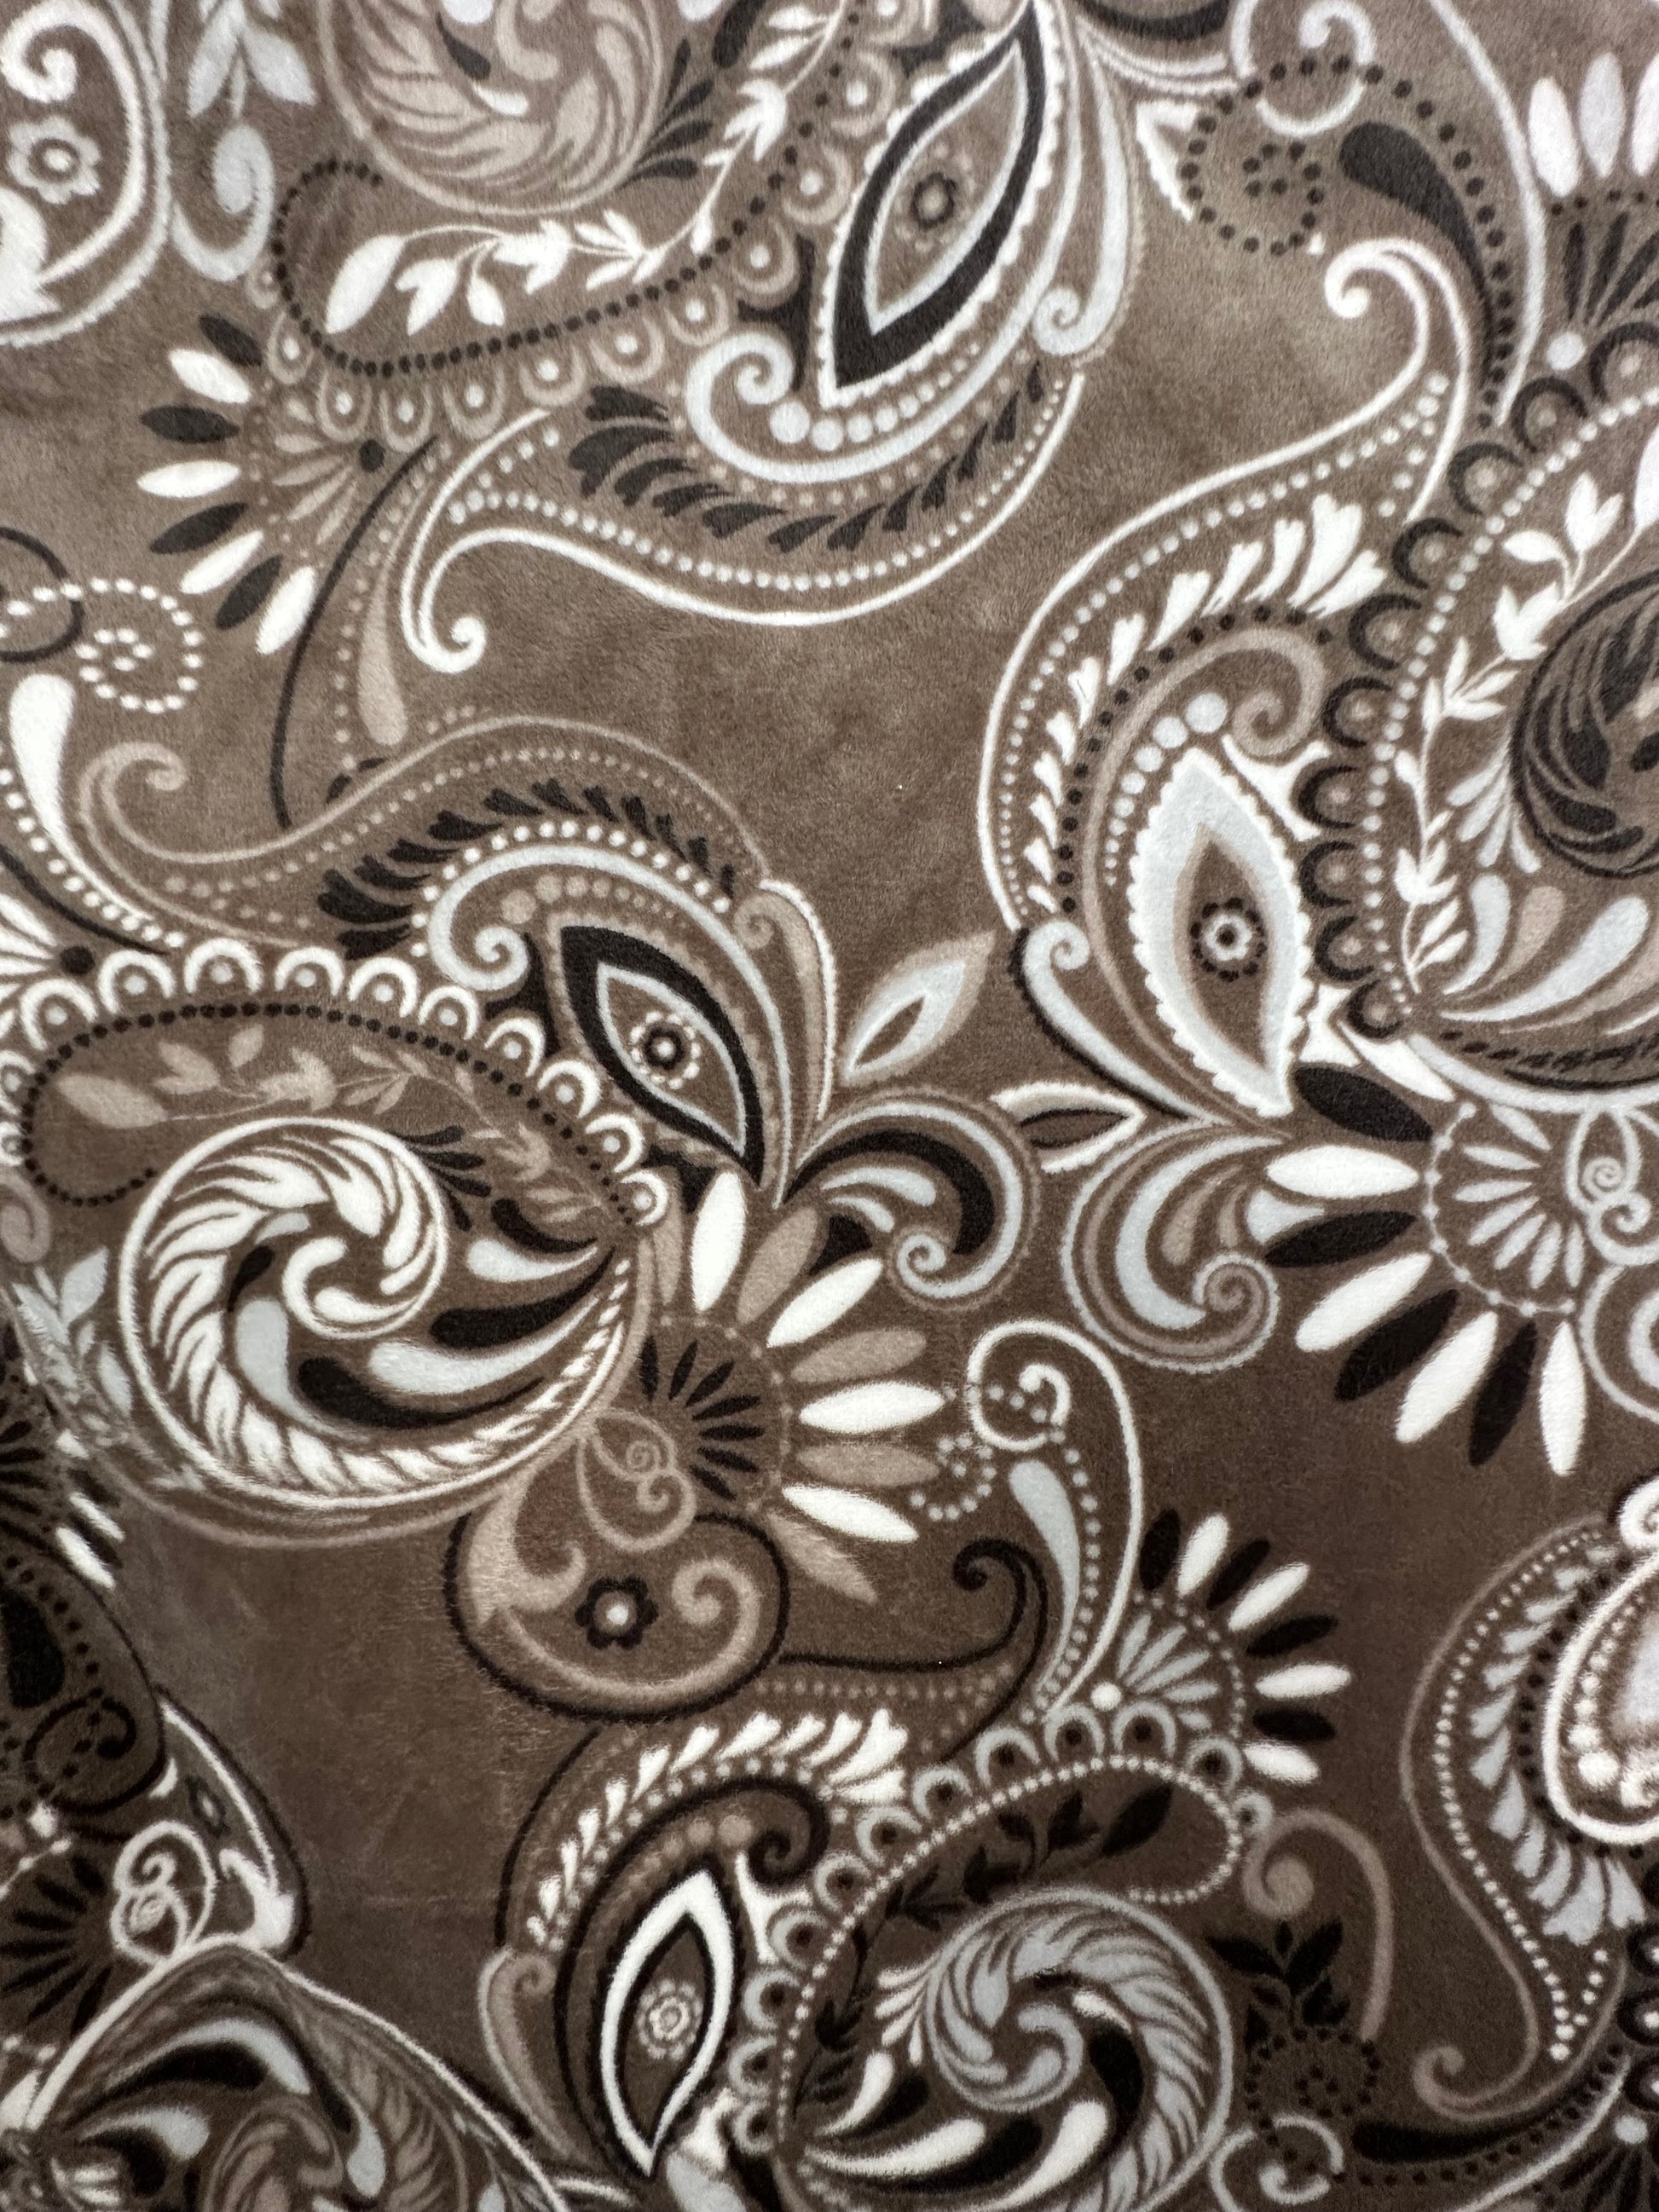 Paisley Taupe on Light Taupe Florence Adult Blanket - Minky Softness and Warmth - 53x75